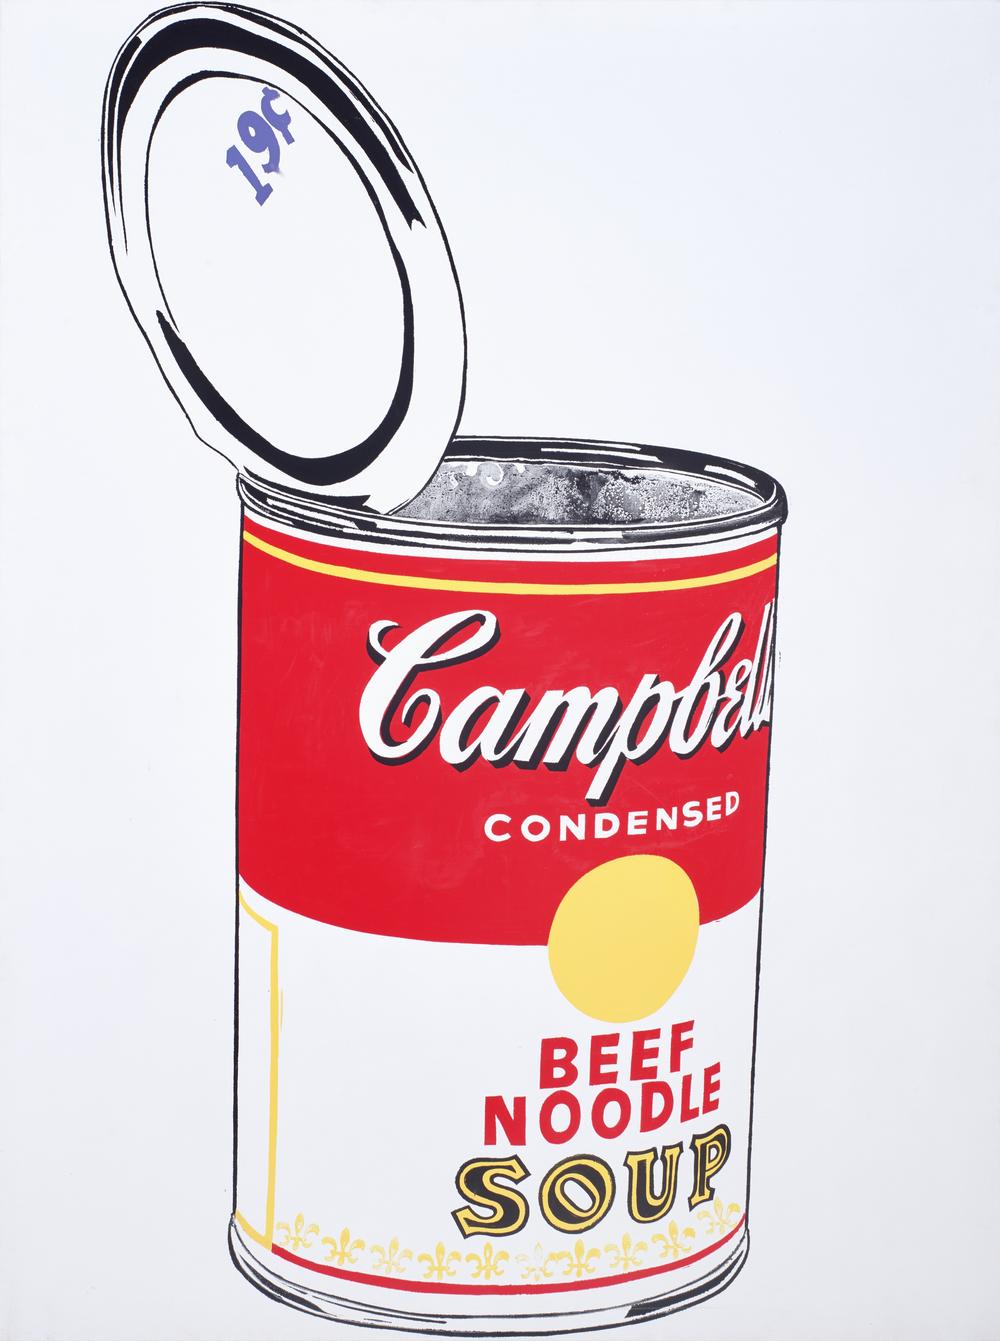 Andy Warhol,<em> Big Campbell's Soup Can, 19¢ (Beef Noodle) [Nineteen Cents],</em> 1962. Casein and graphite on canvas, The Menil Collection, Houston.